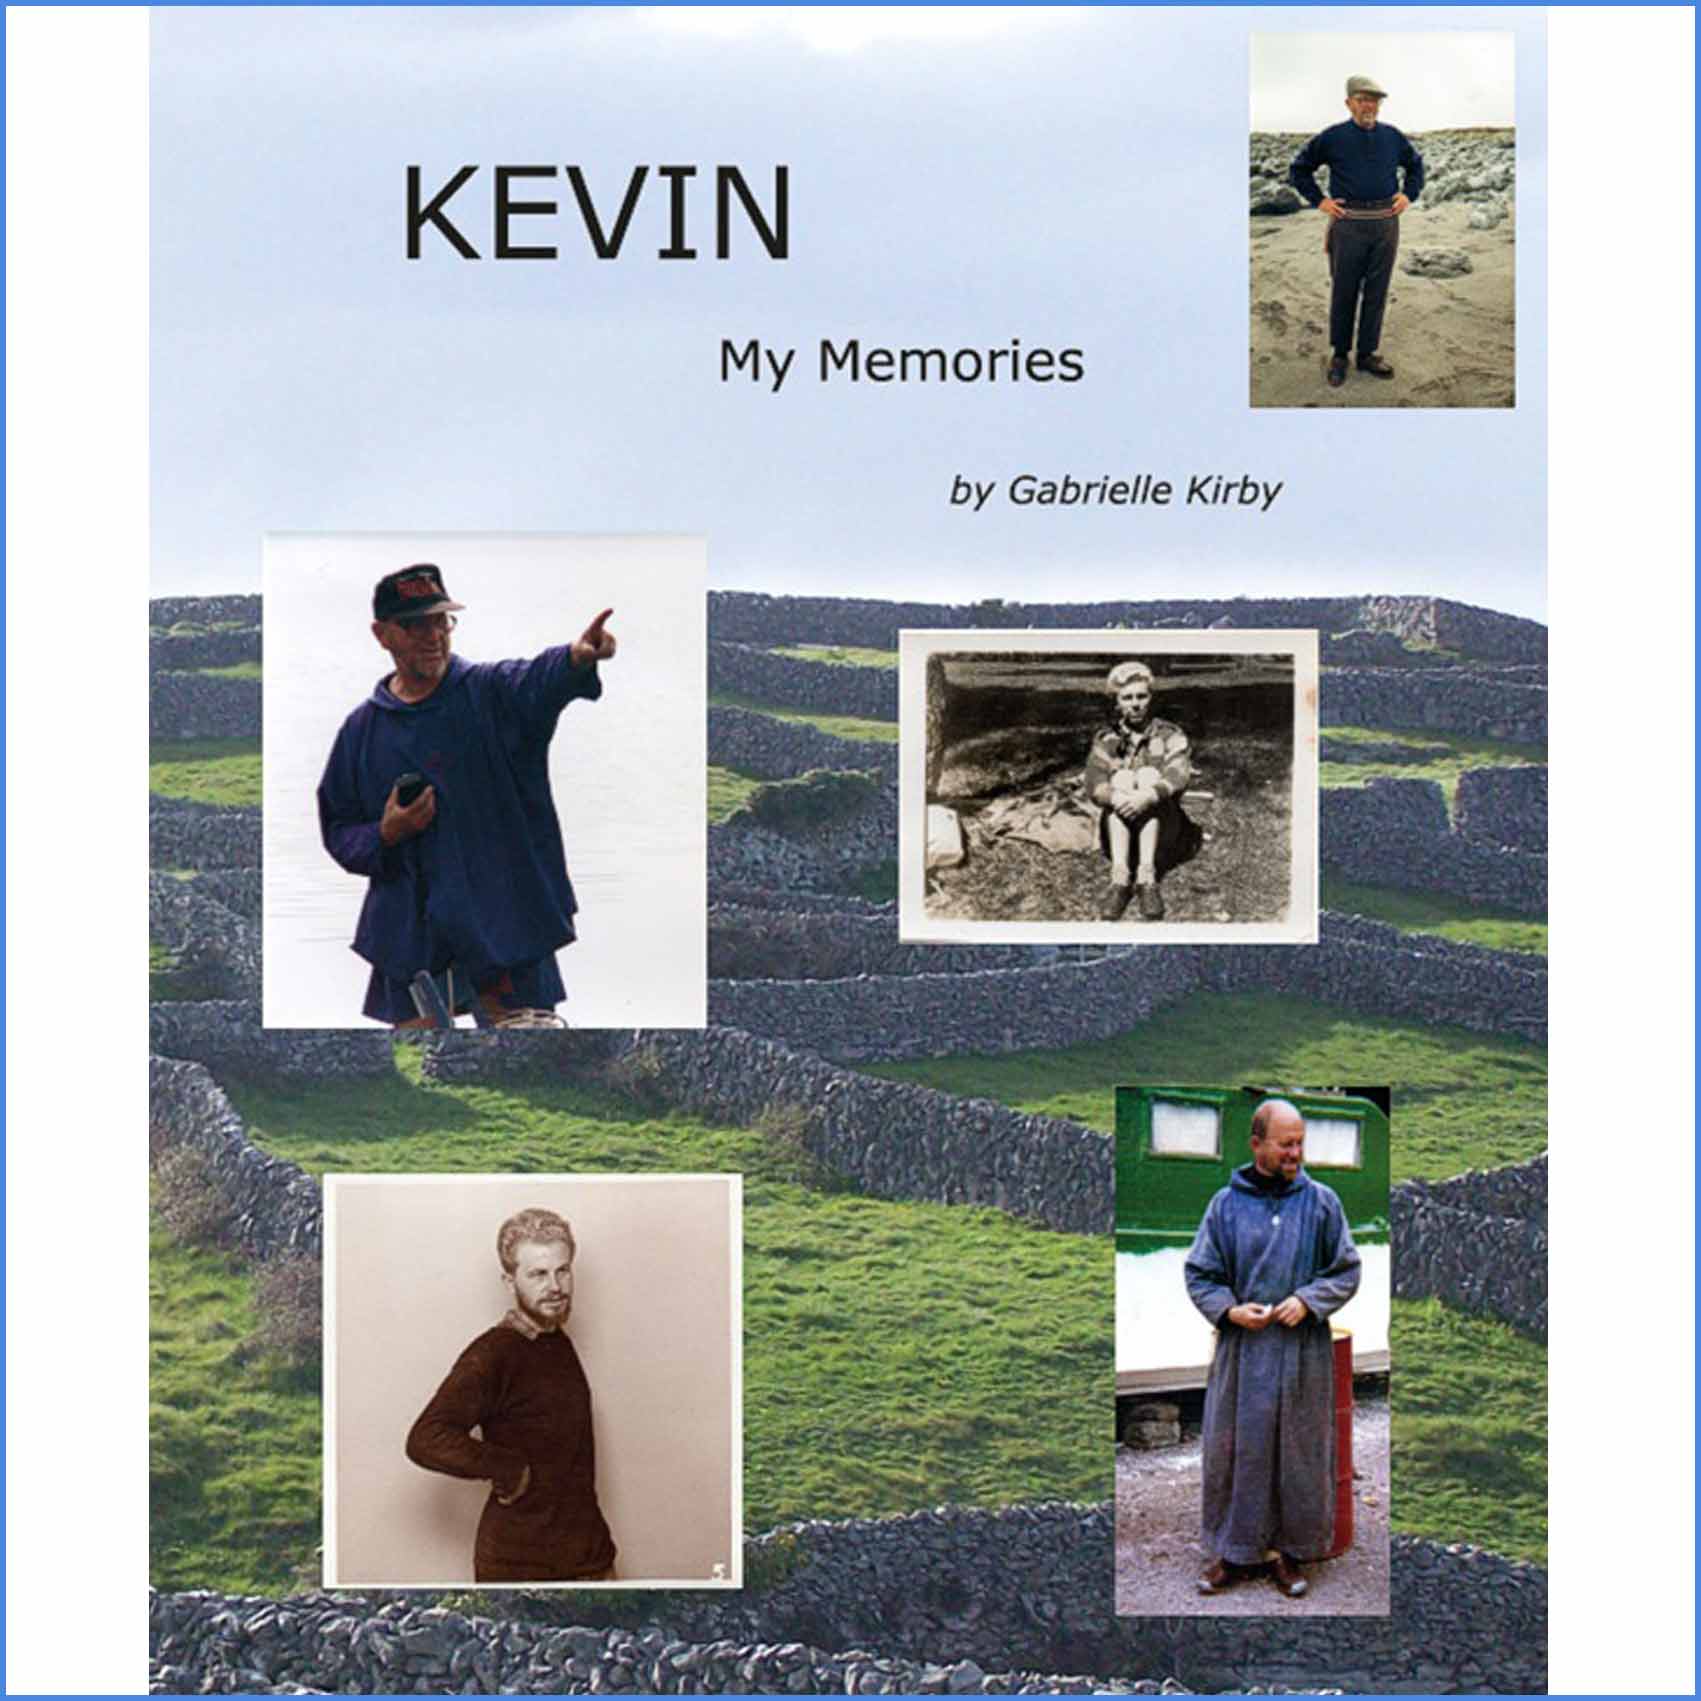 Kevin My Memories by Gabrielle Kirby